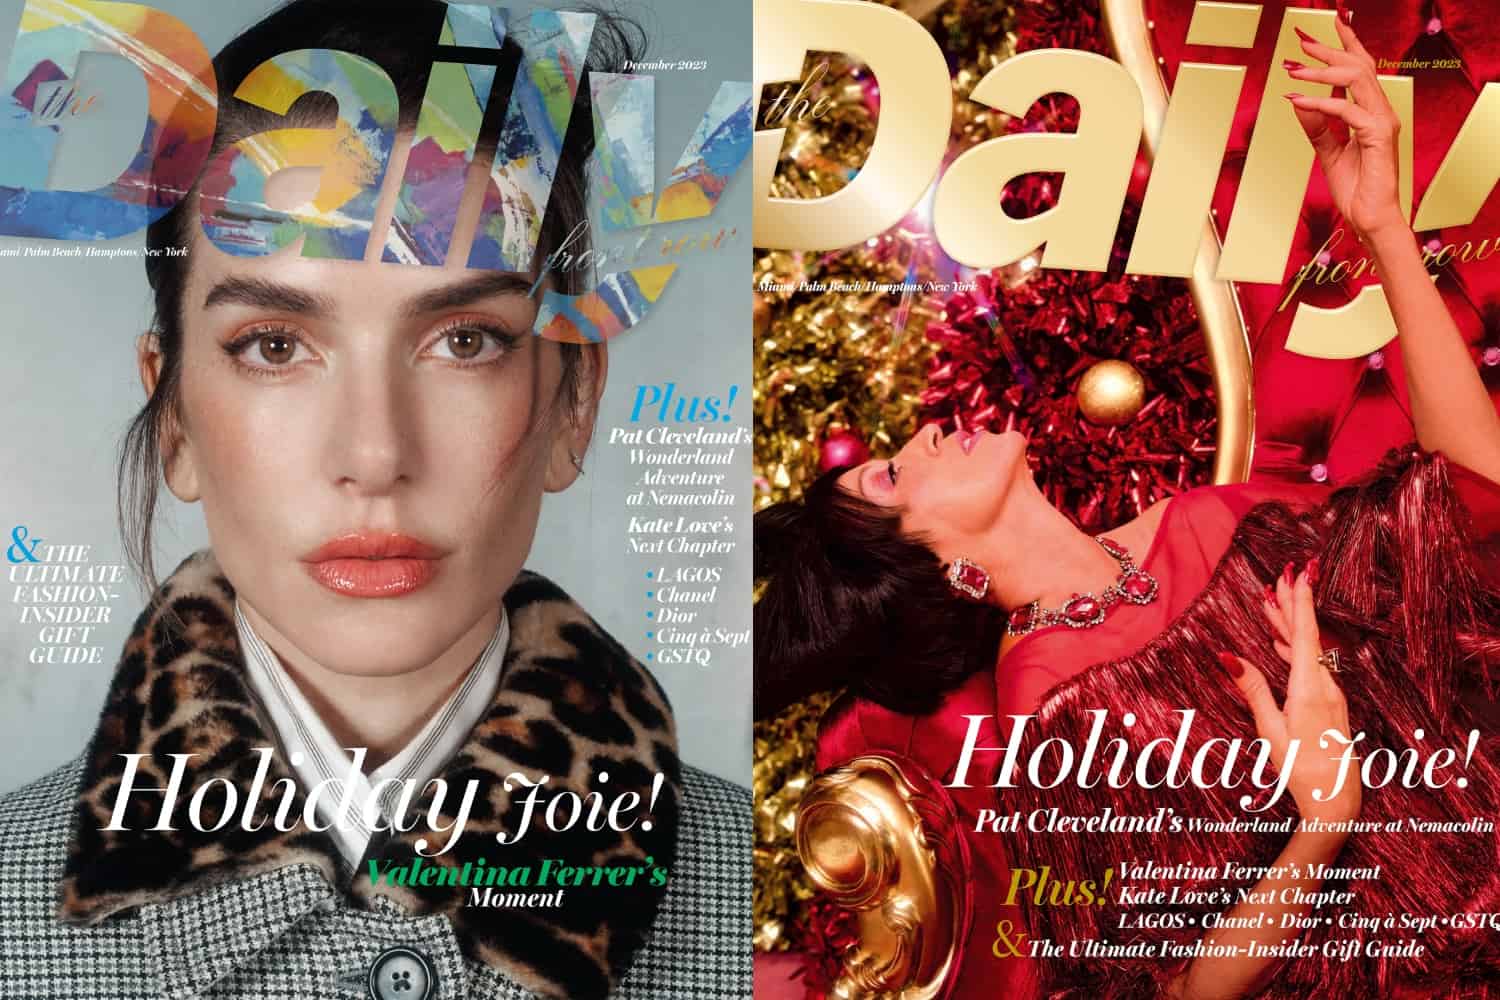 It’s Here!!!! The Daily’s Holiday Issue Lands Today!!!!!